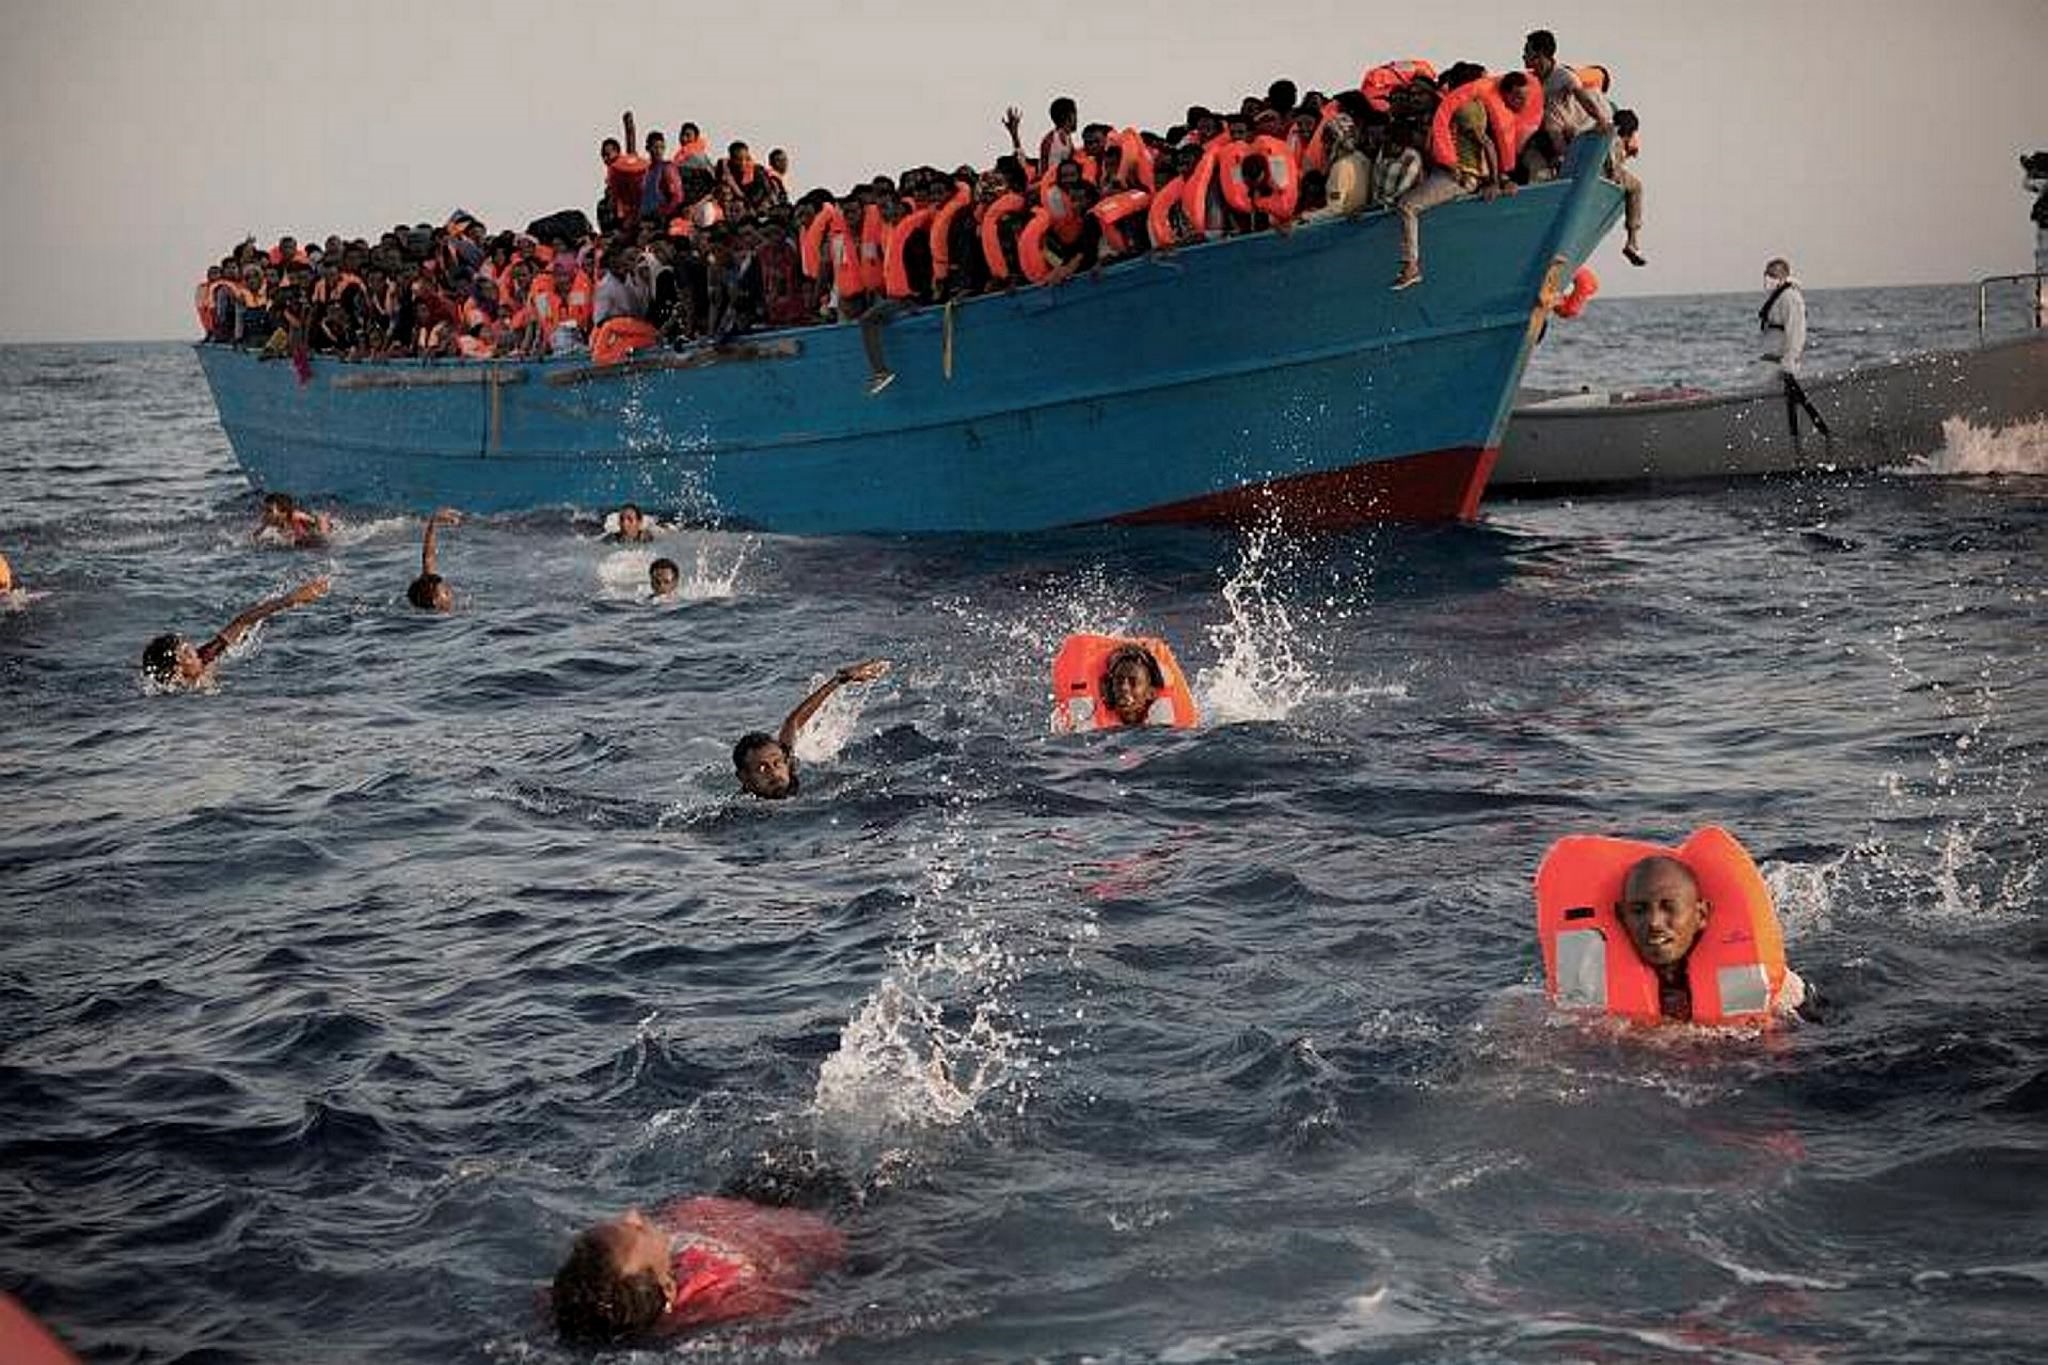 Migrants, mostly Eritrea, jump into the water from a crowded wooden boat as they are helped by members of an NGO during a rescue operation on the Mediterranean, about 21 kilometers north of Sabratha, Libya.